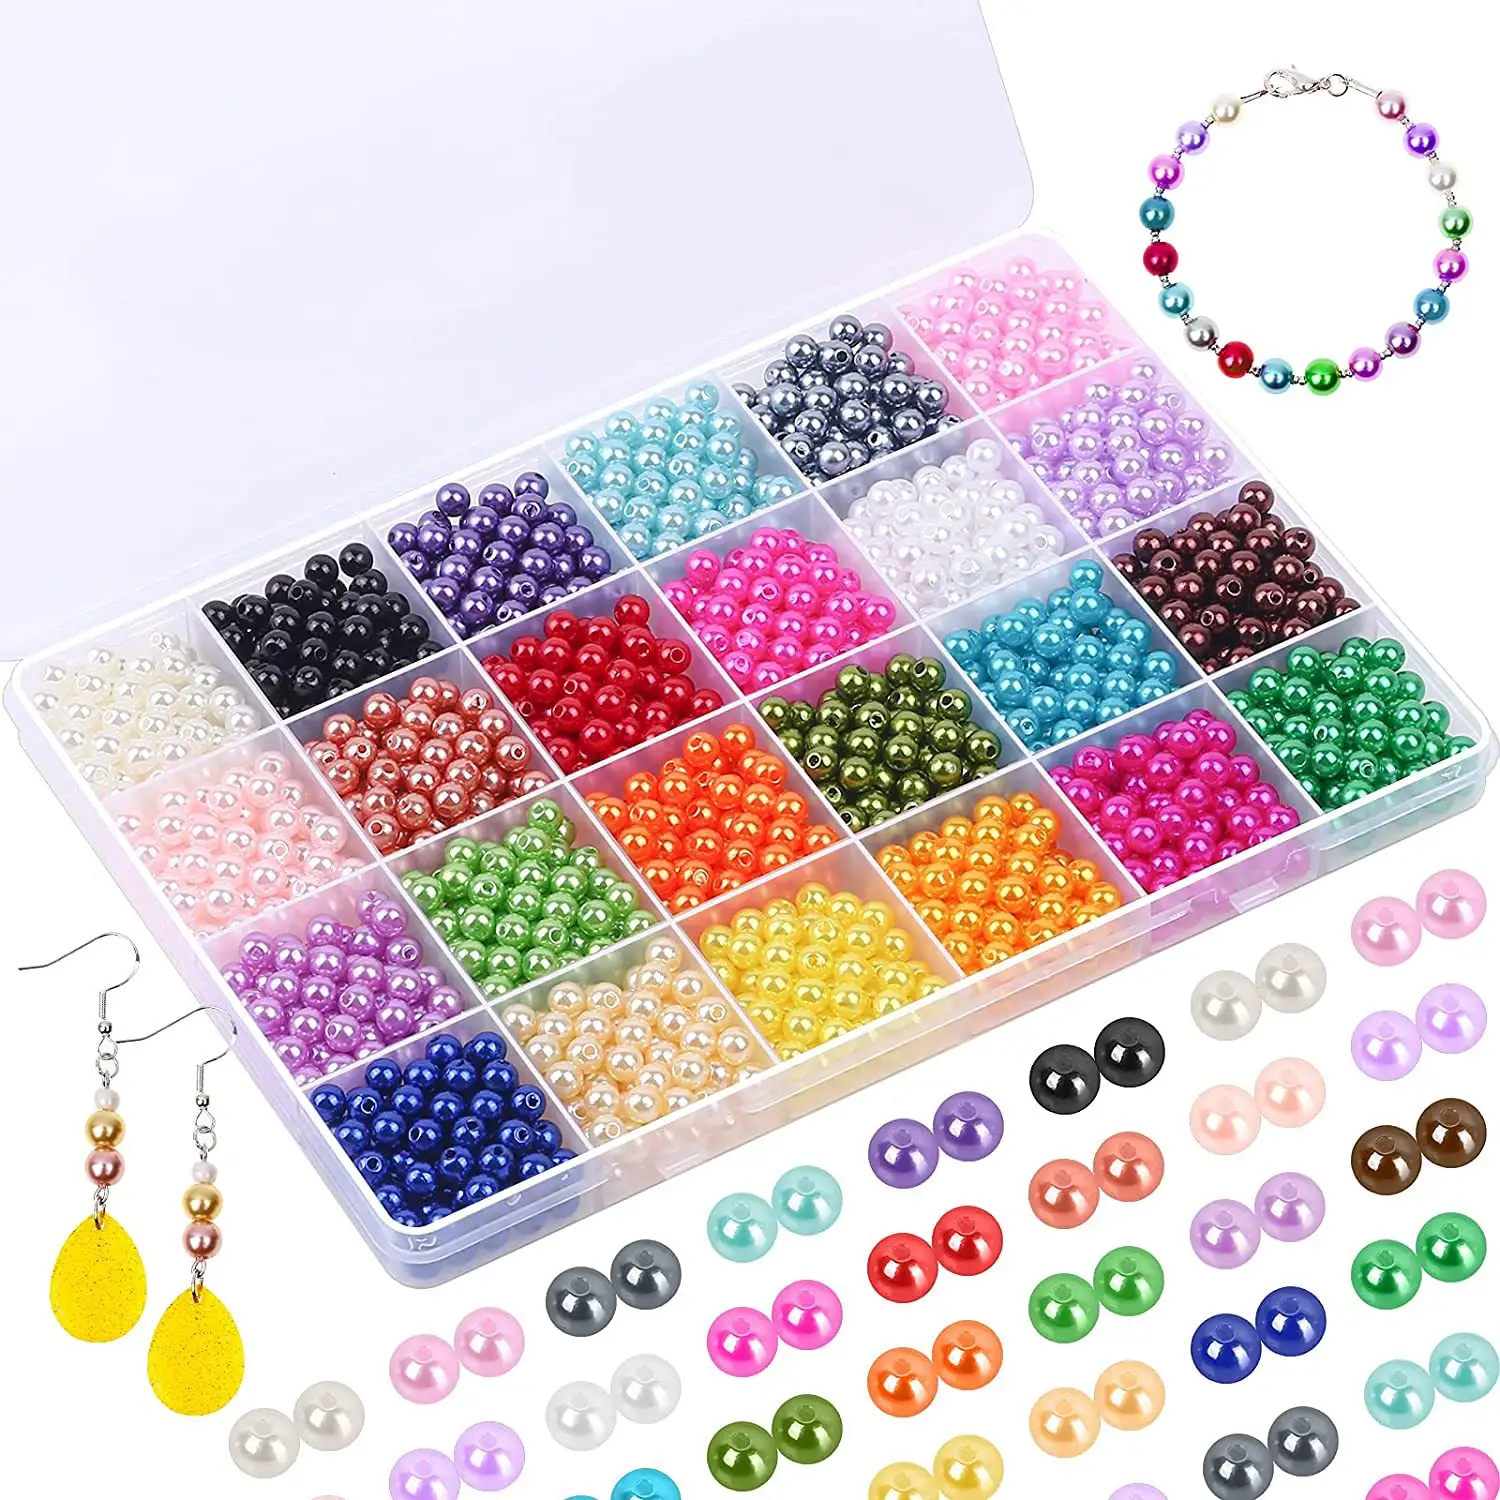 1680pcs 6mm DIY Round ABS Pearl Bead Colored Loose Bead Bracelet Necklace Earrings Jewelry Making Set